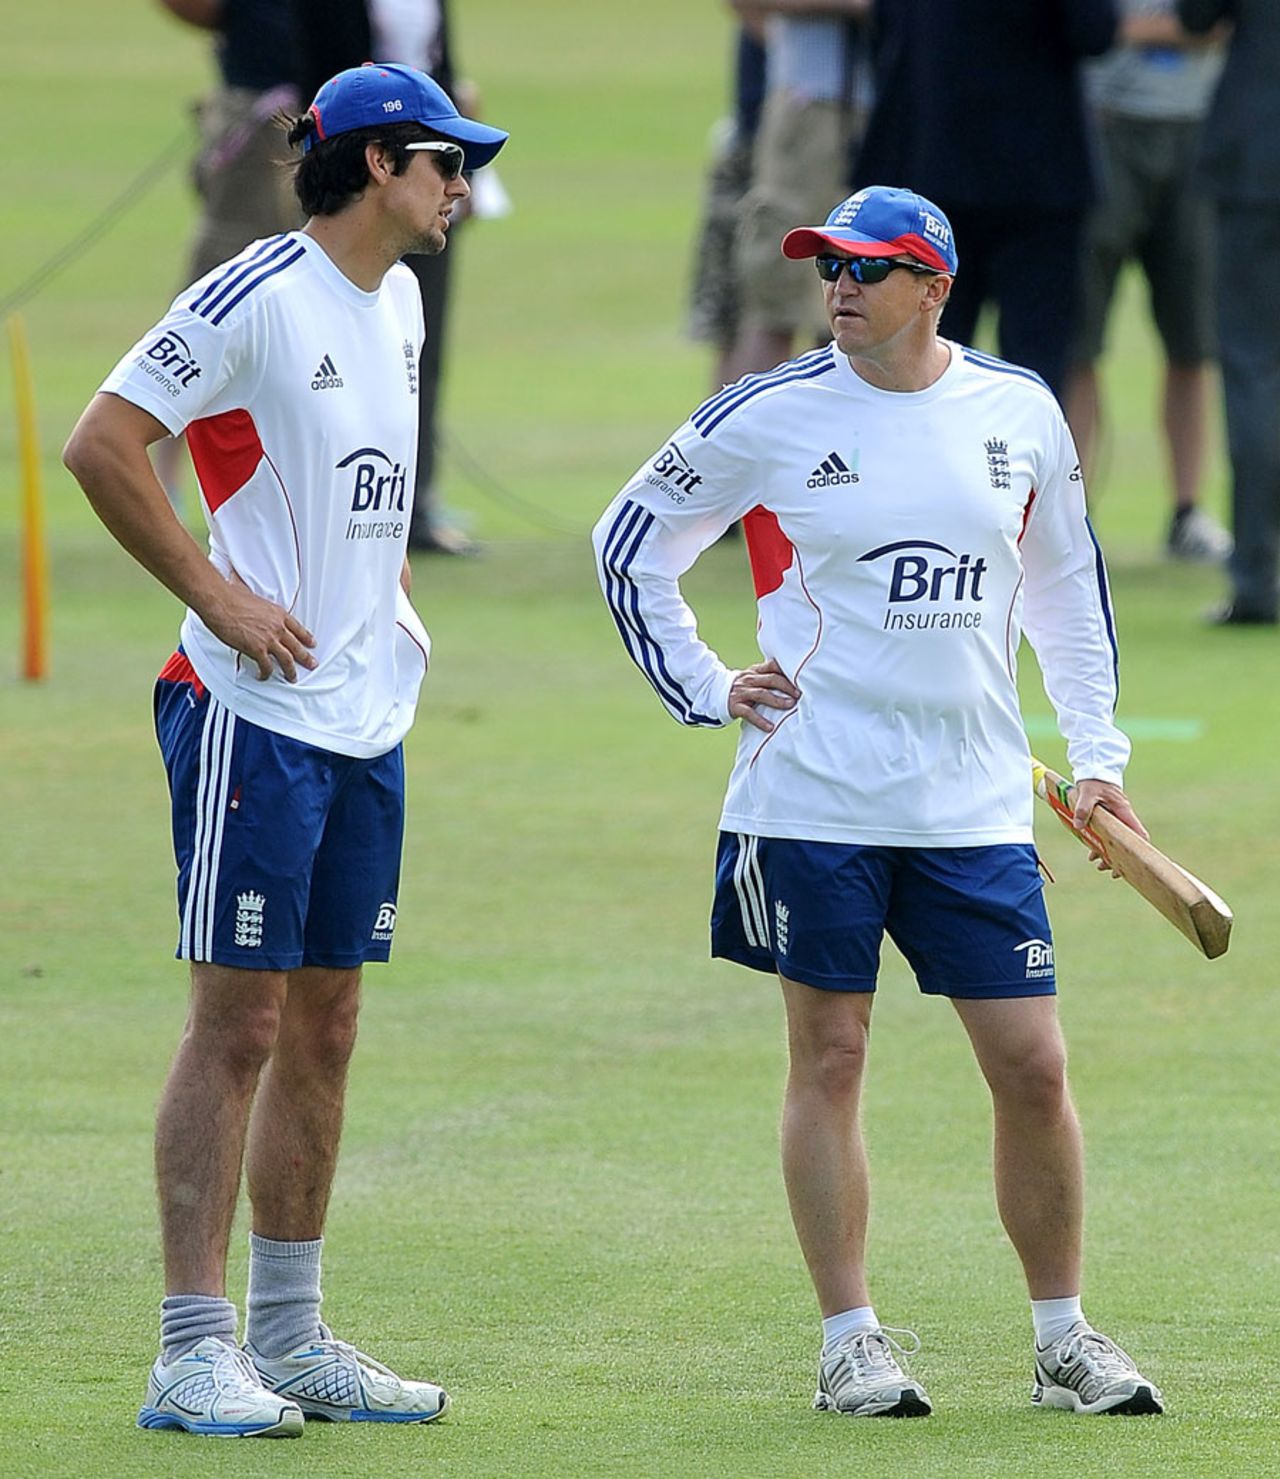 Alastair Cook and Andy Flower chat on the outfield, Essex v England, 2nd day, Chelmsford, July 1, 2013